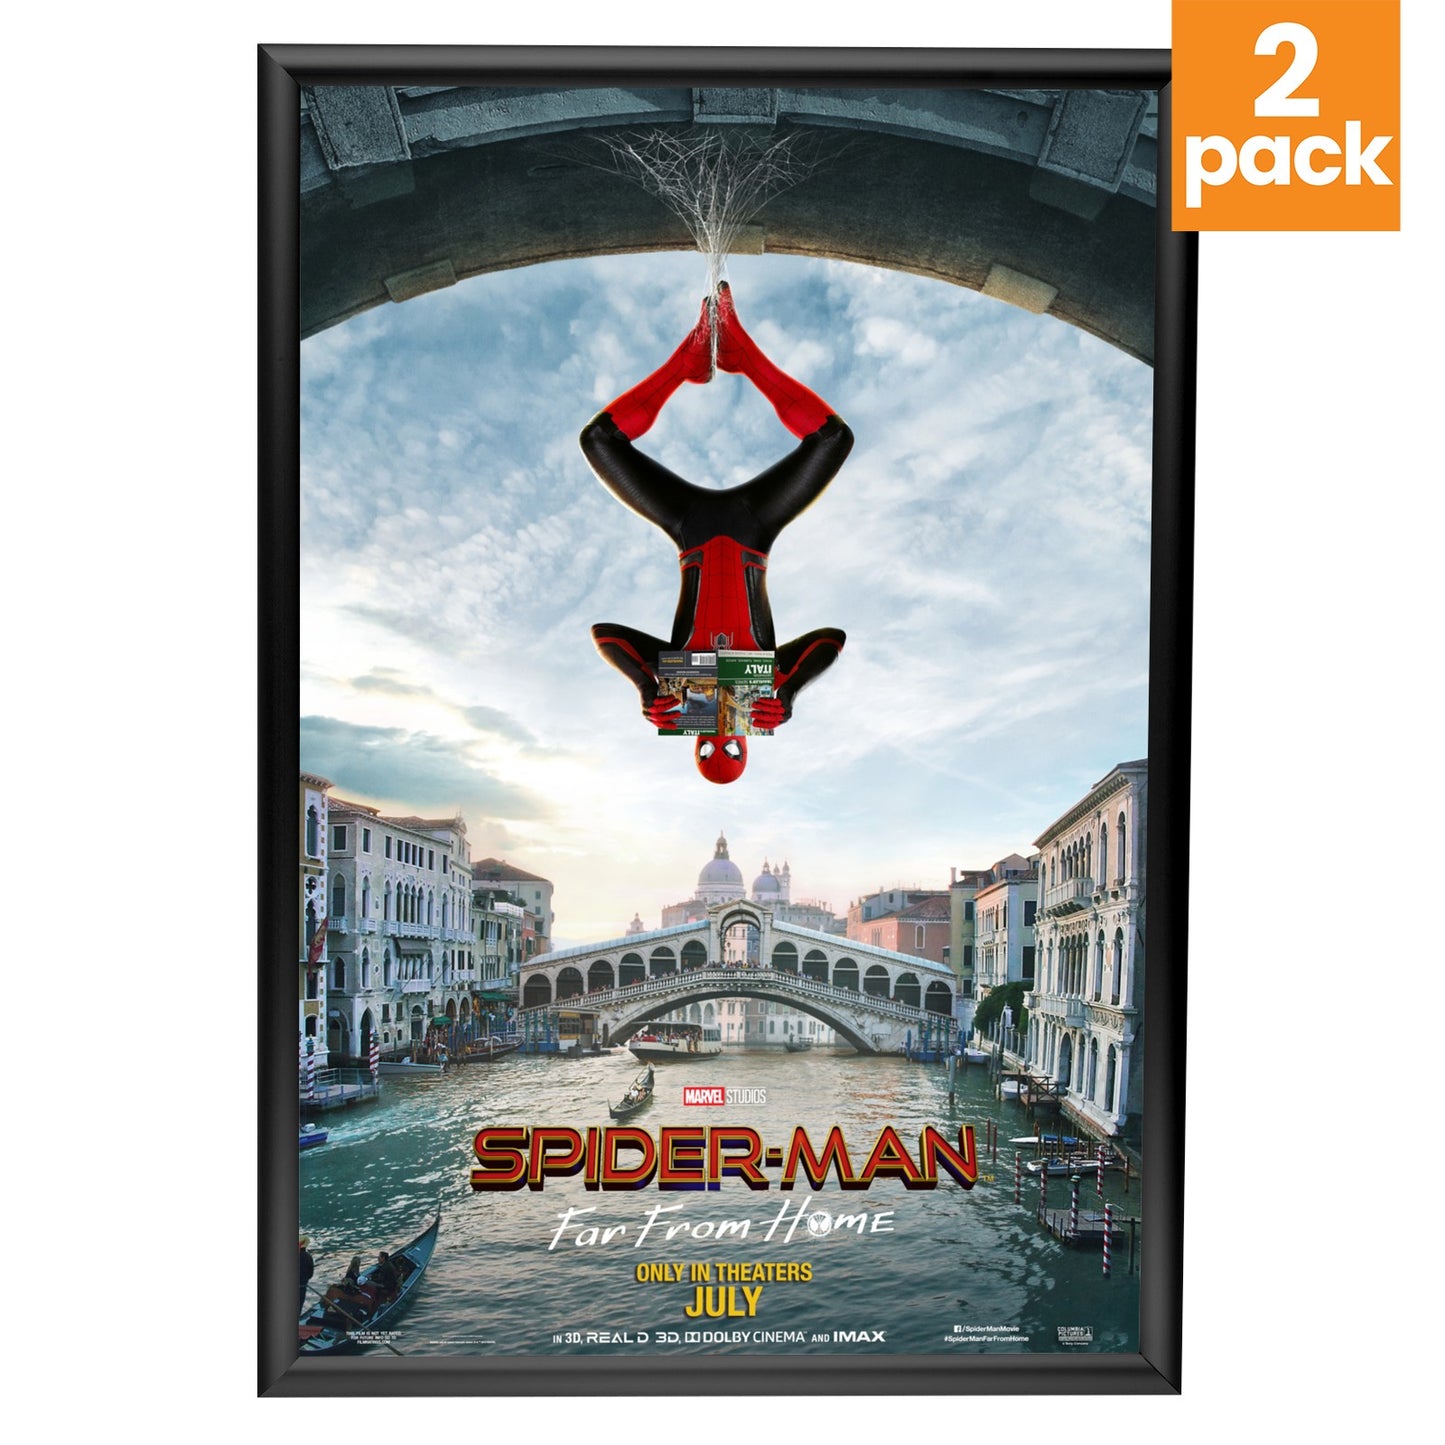 Twin-Pack of Snapezo® Black 24x36 Movie Poster Frame - 1" Profile